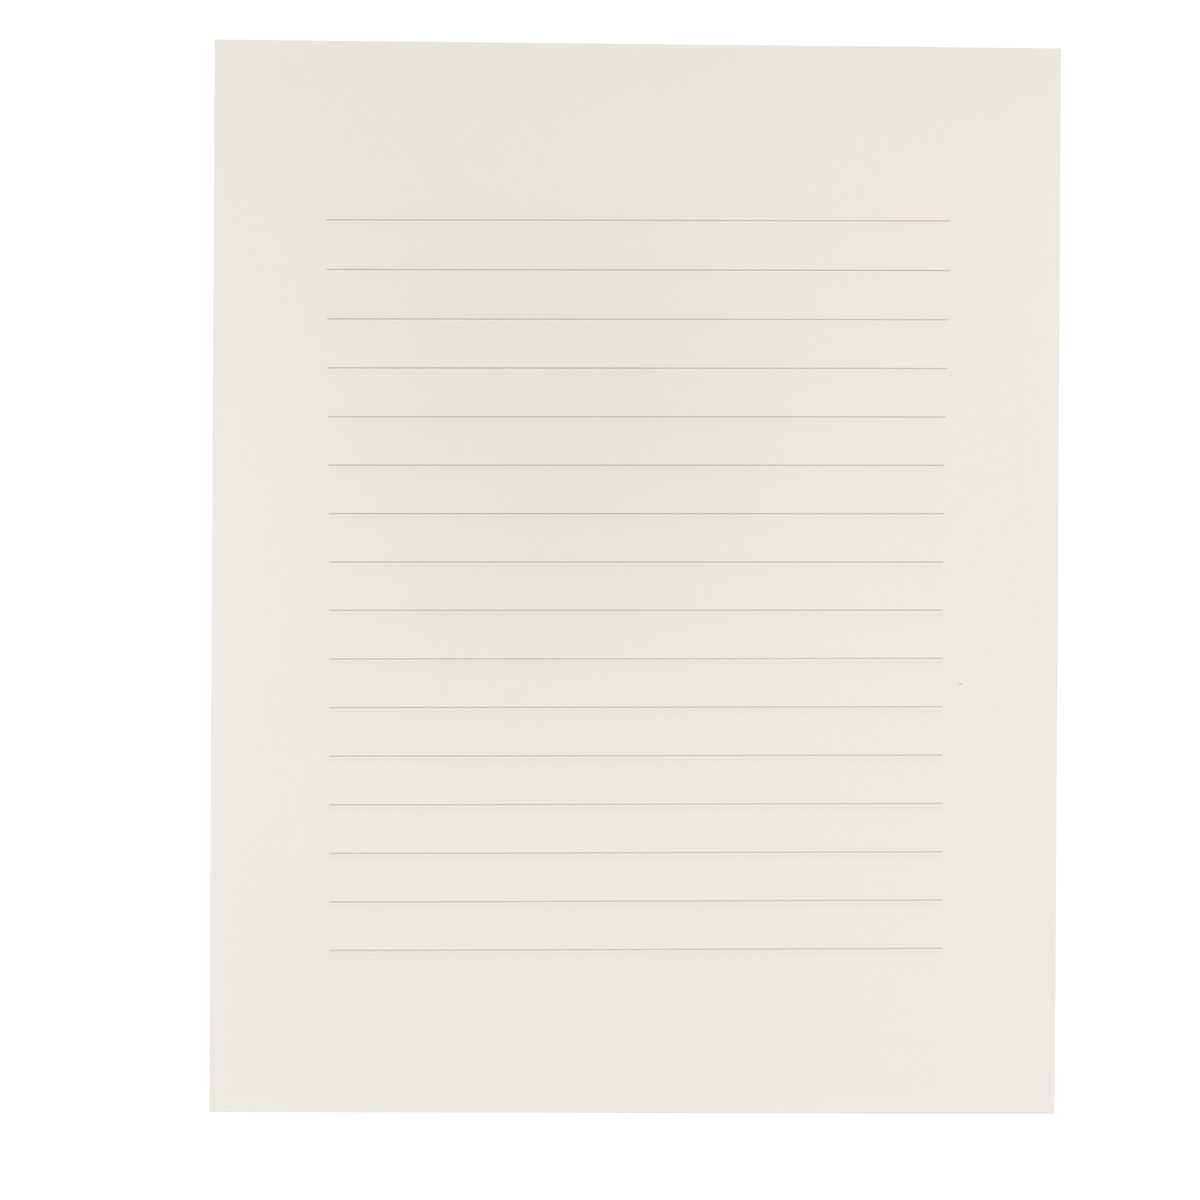 Midori MD Letter Pad Cotton Paper- Ruled